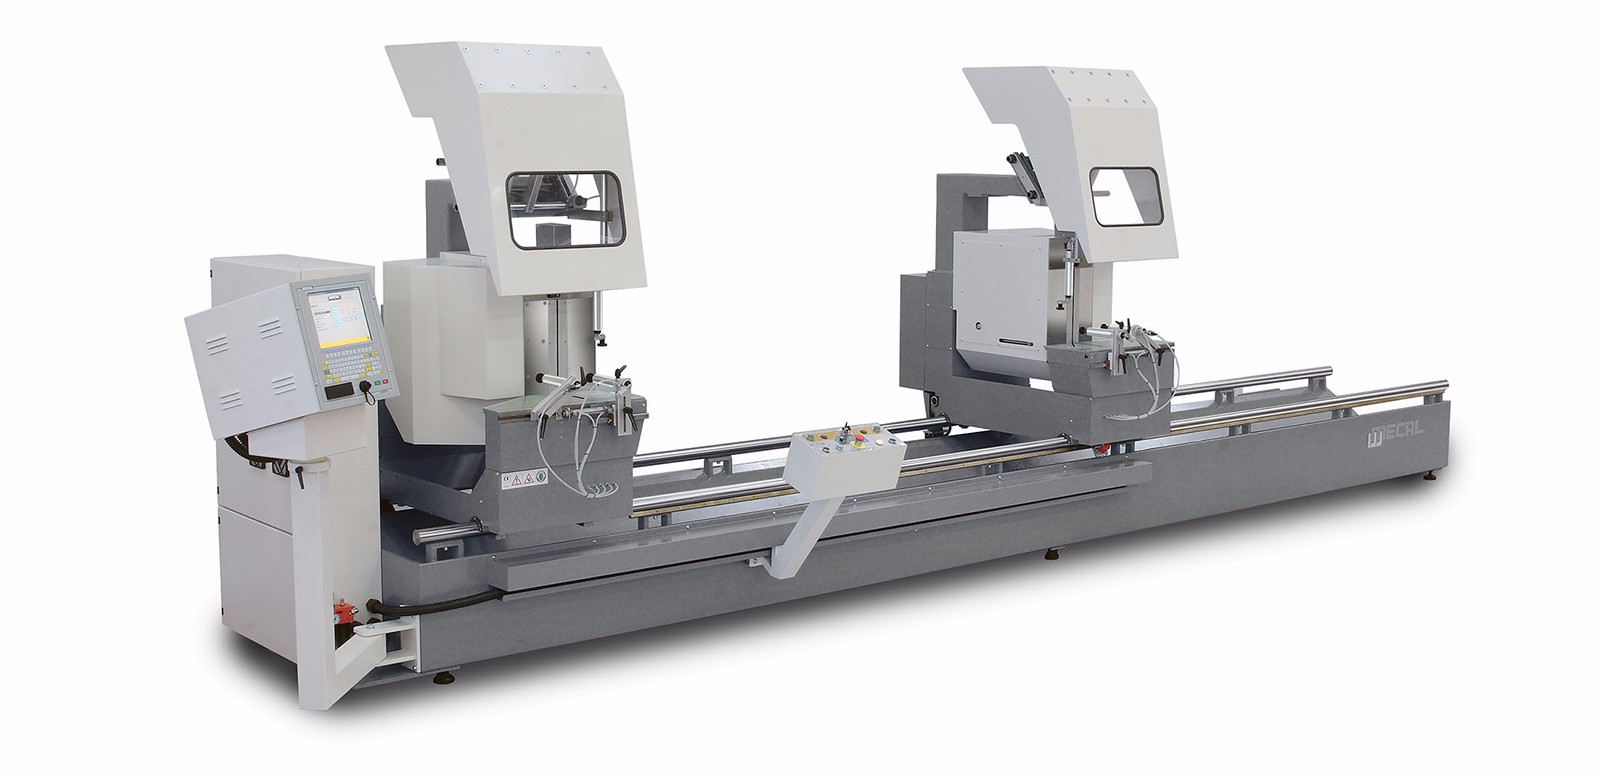 6-Full-automatic numerical controlled 5-axis double-head cutting machine